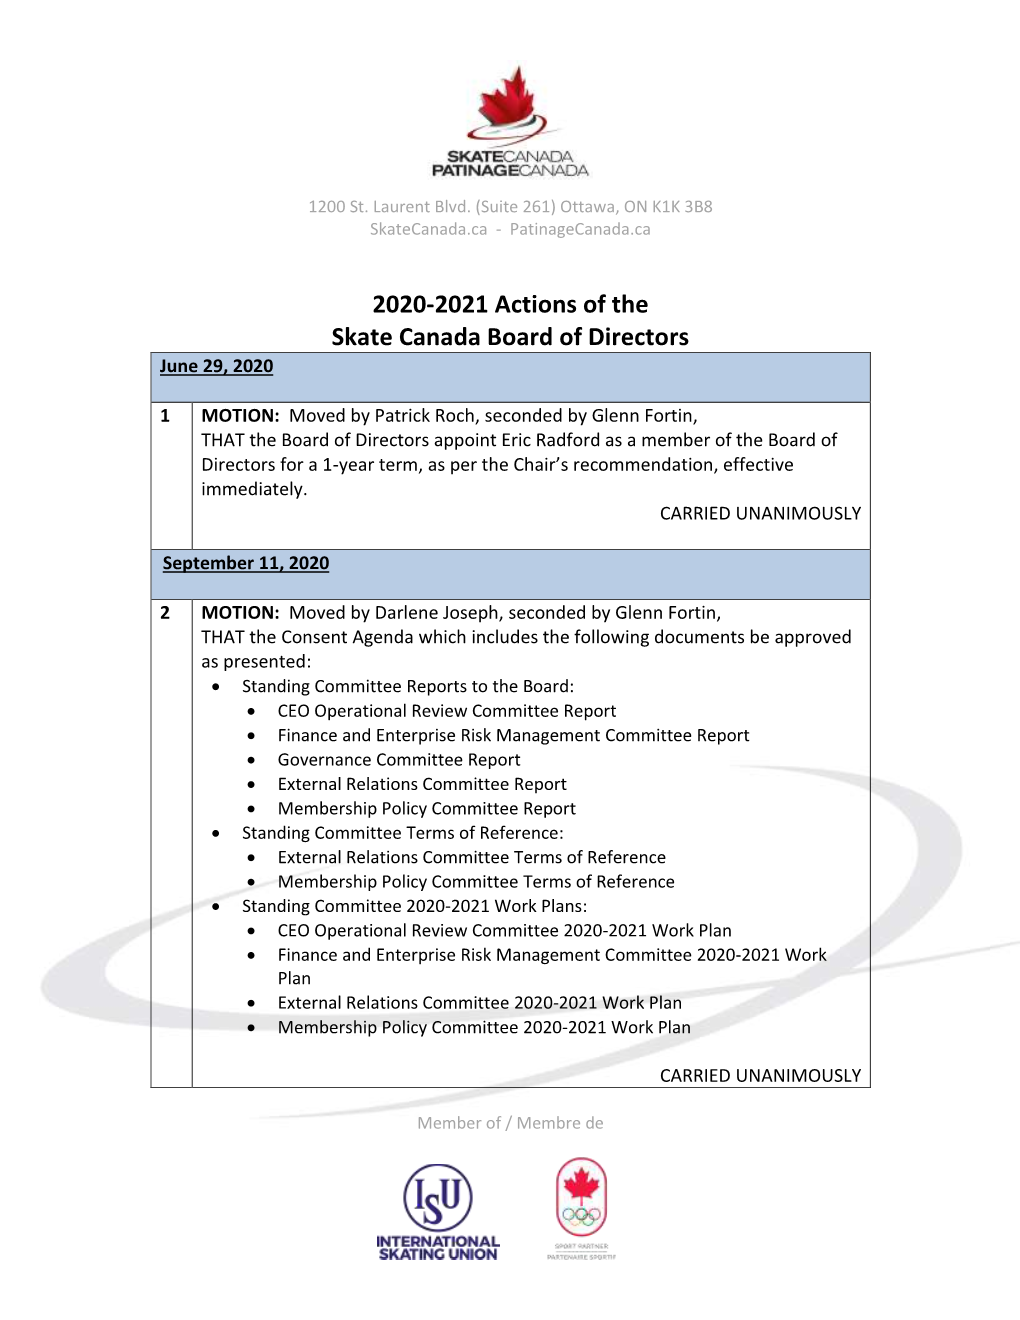 2020-2021 Actions of the Skate Canada Board of Directors June 29, 2020